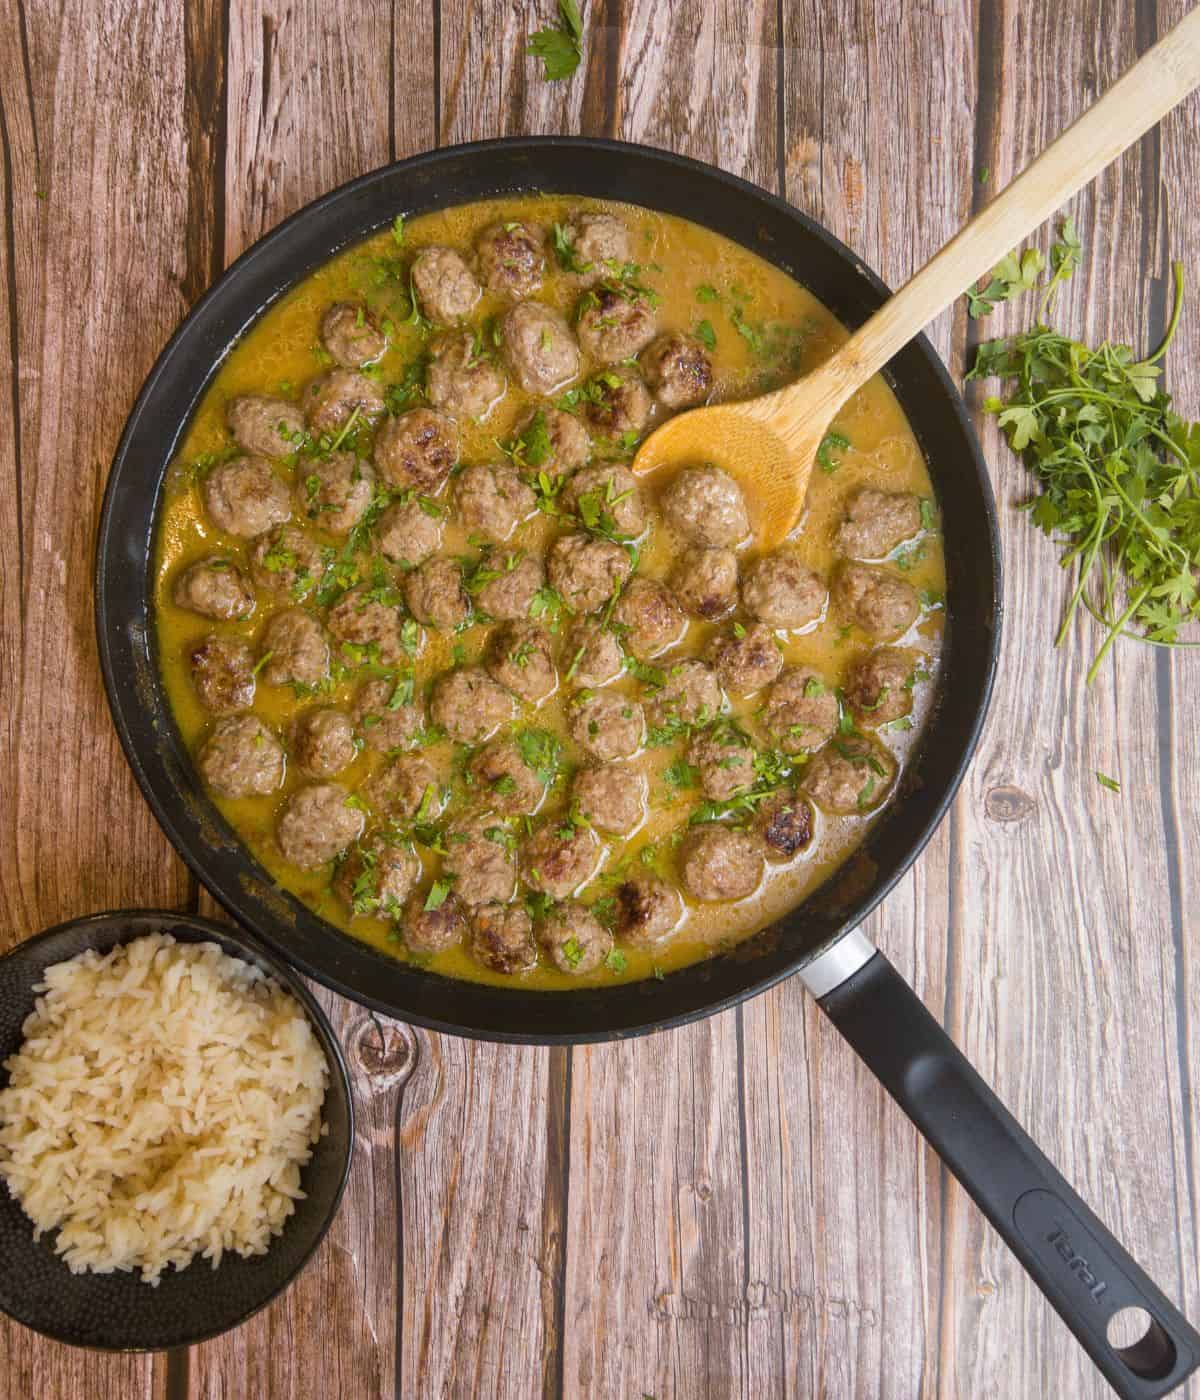 Swedish meatballs with gravy in a frying pan with a side of rice≥